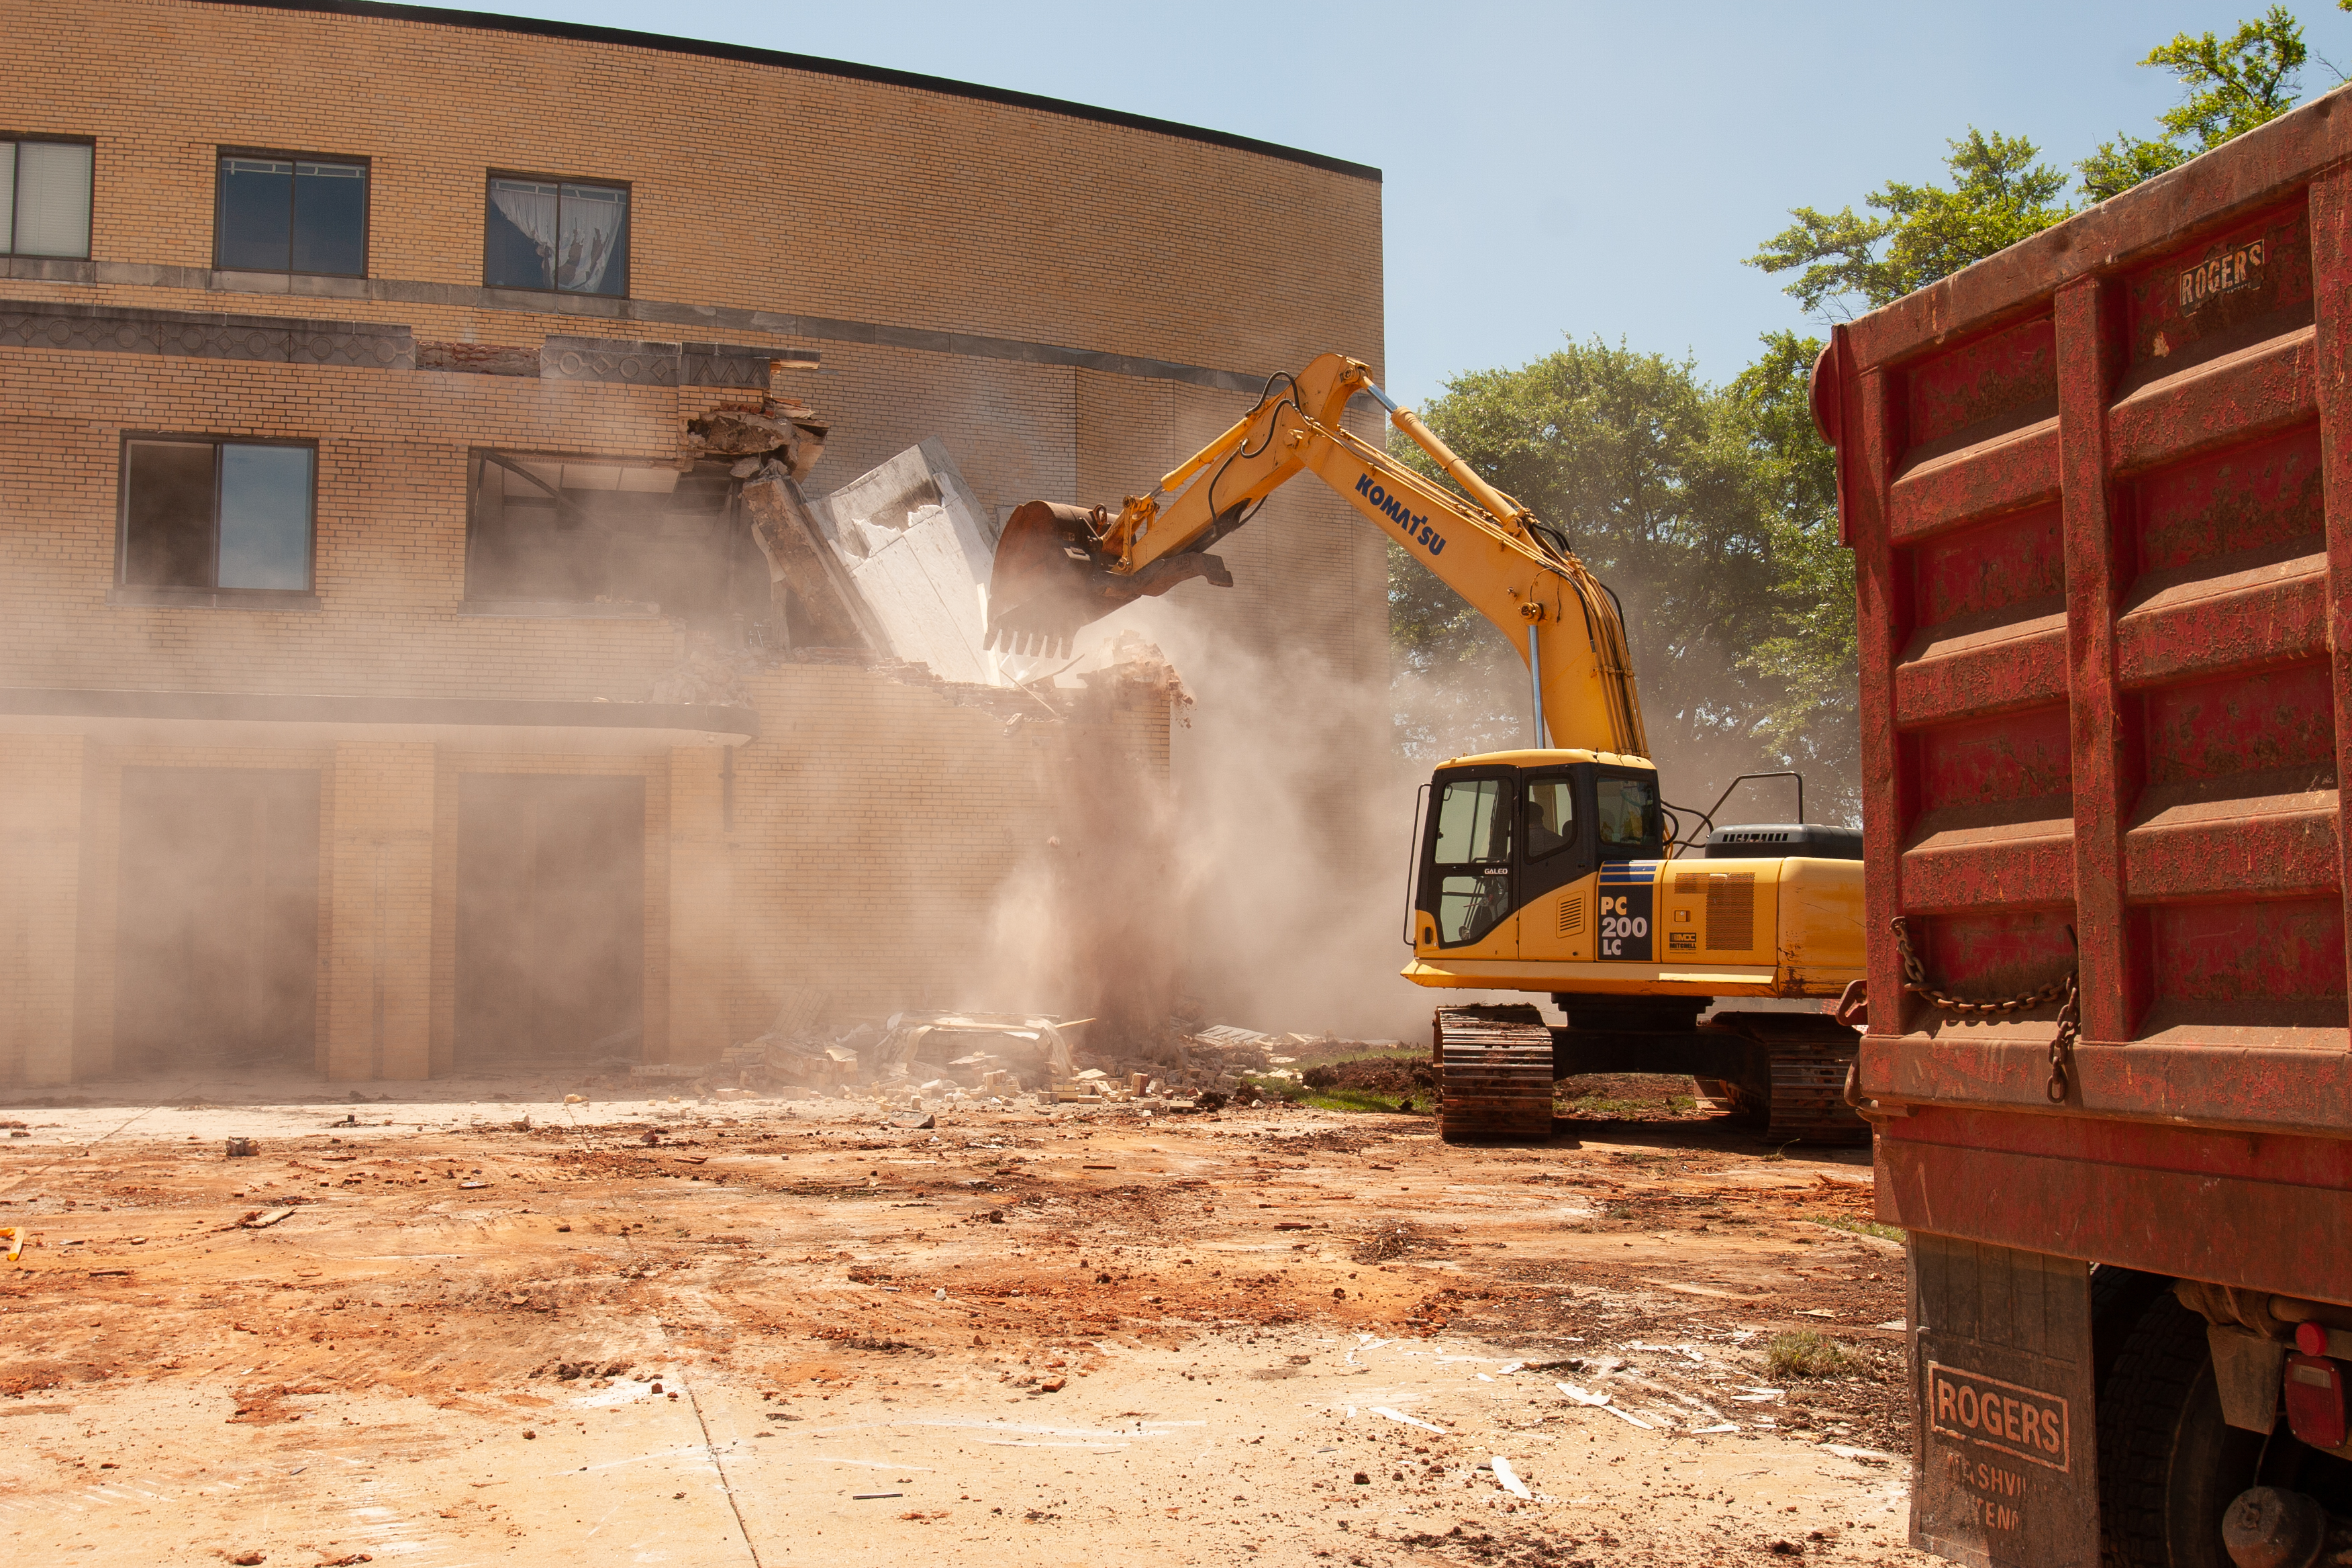 A backhoe demolishes what students affectionately termed "the shoebox" (Photo by Hal Cook)